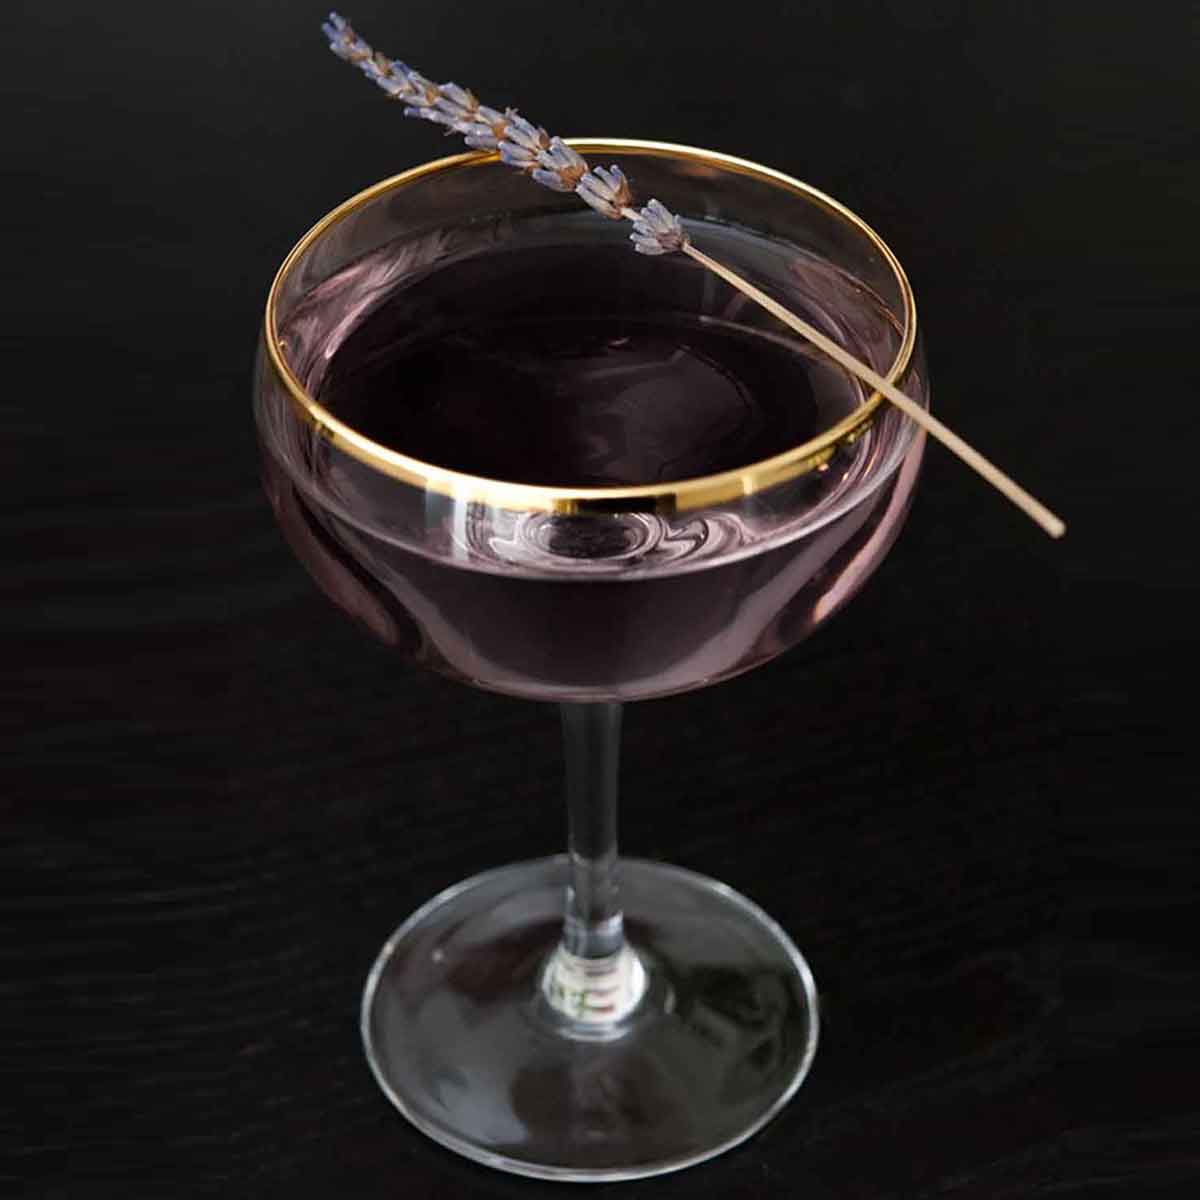 A purple cocktail on a black table, garnished with a sprig of lavender.